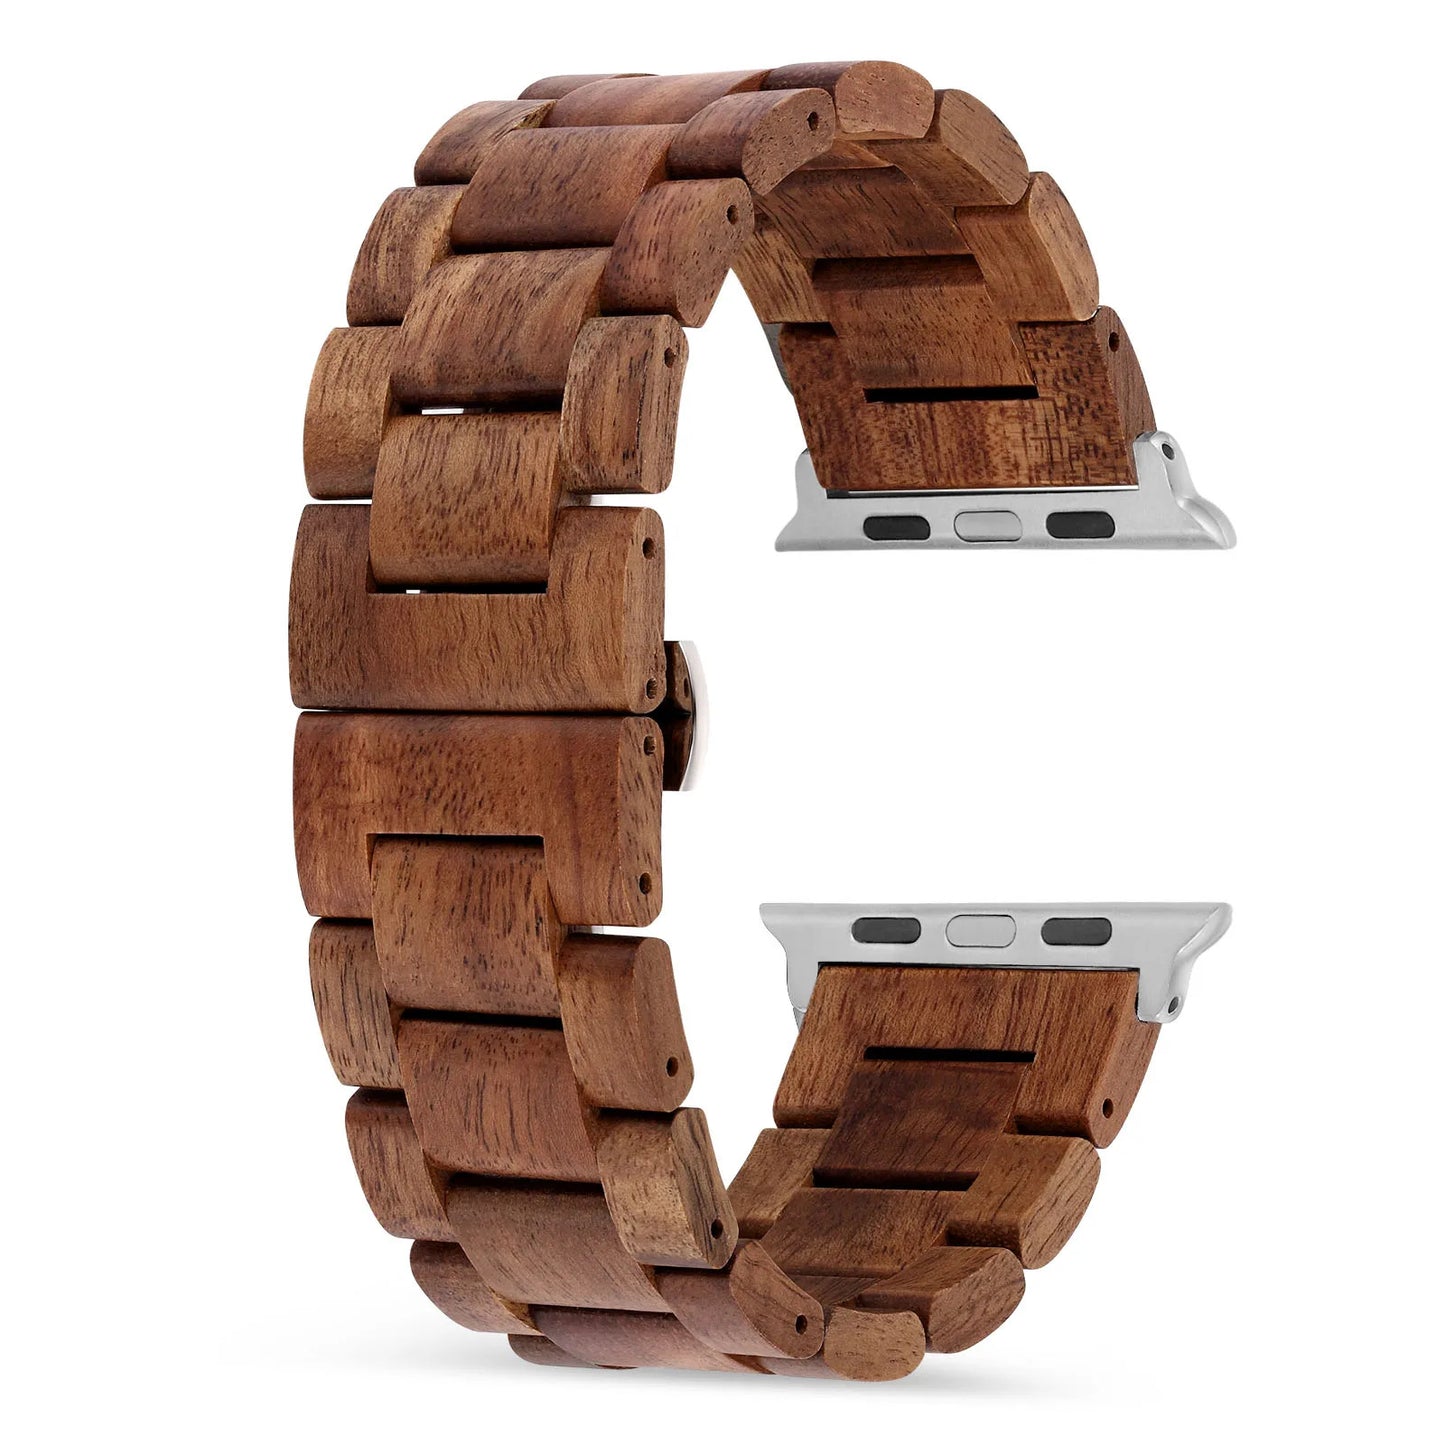 Koa Wood Apple Watch Band Separated From Apple Watch